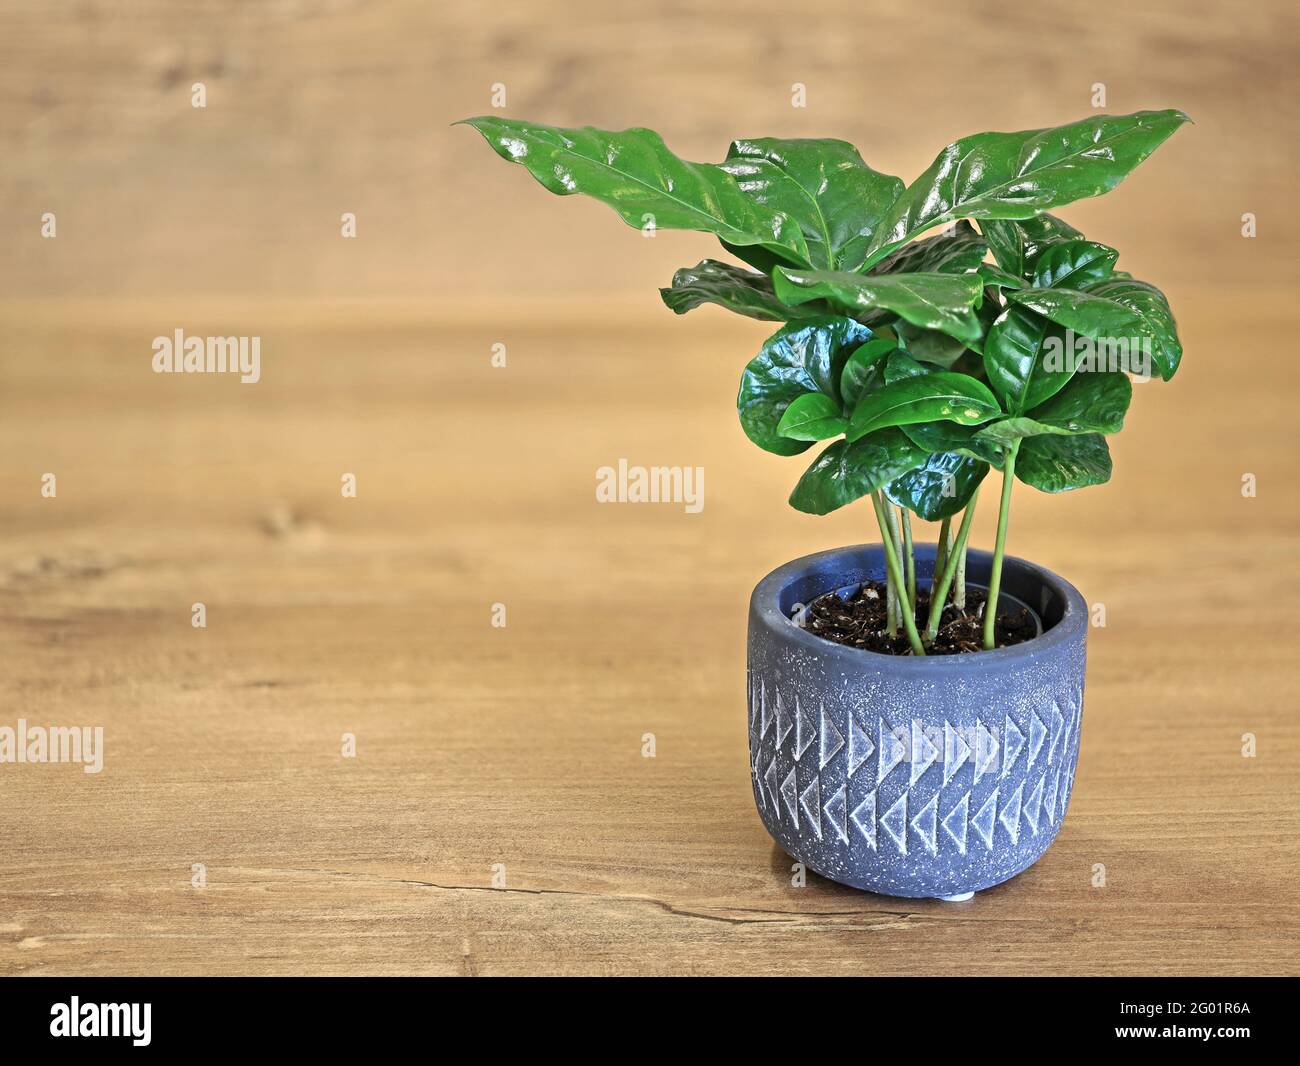 young coffee plant, coffea arabica, in stone pot isolated on wooden background with copy space on the left Stock Photo